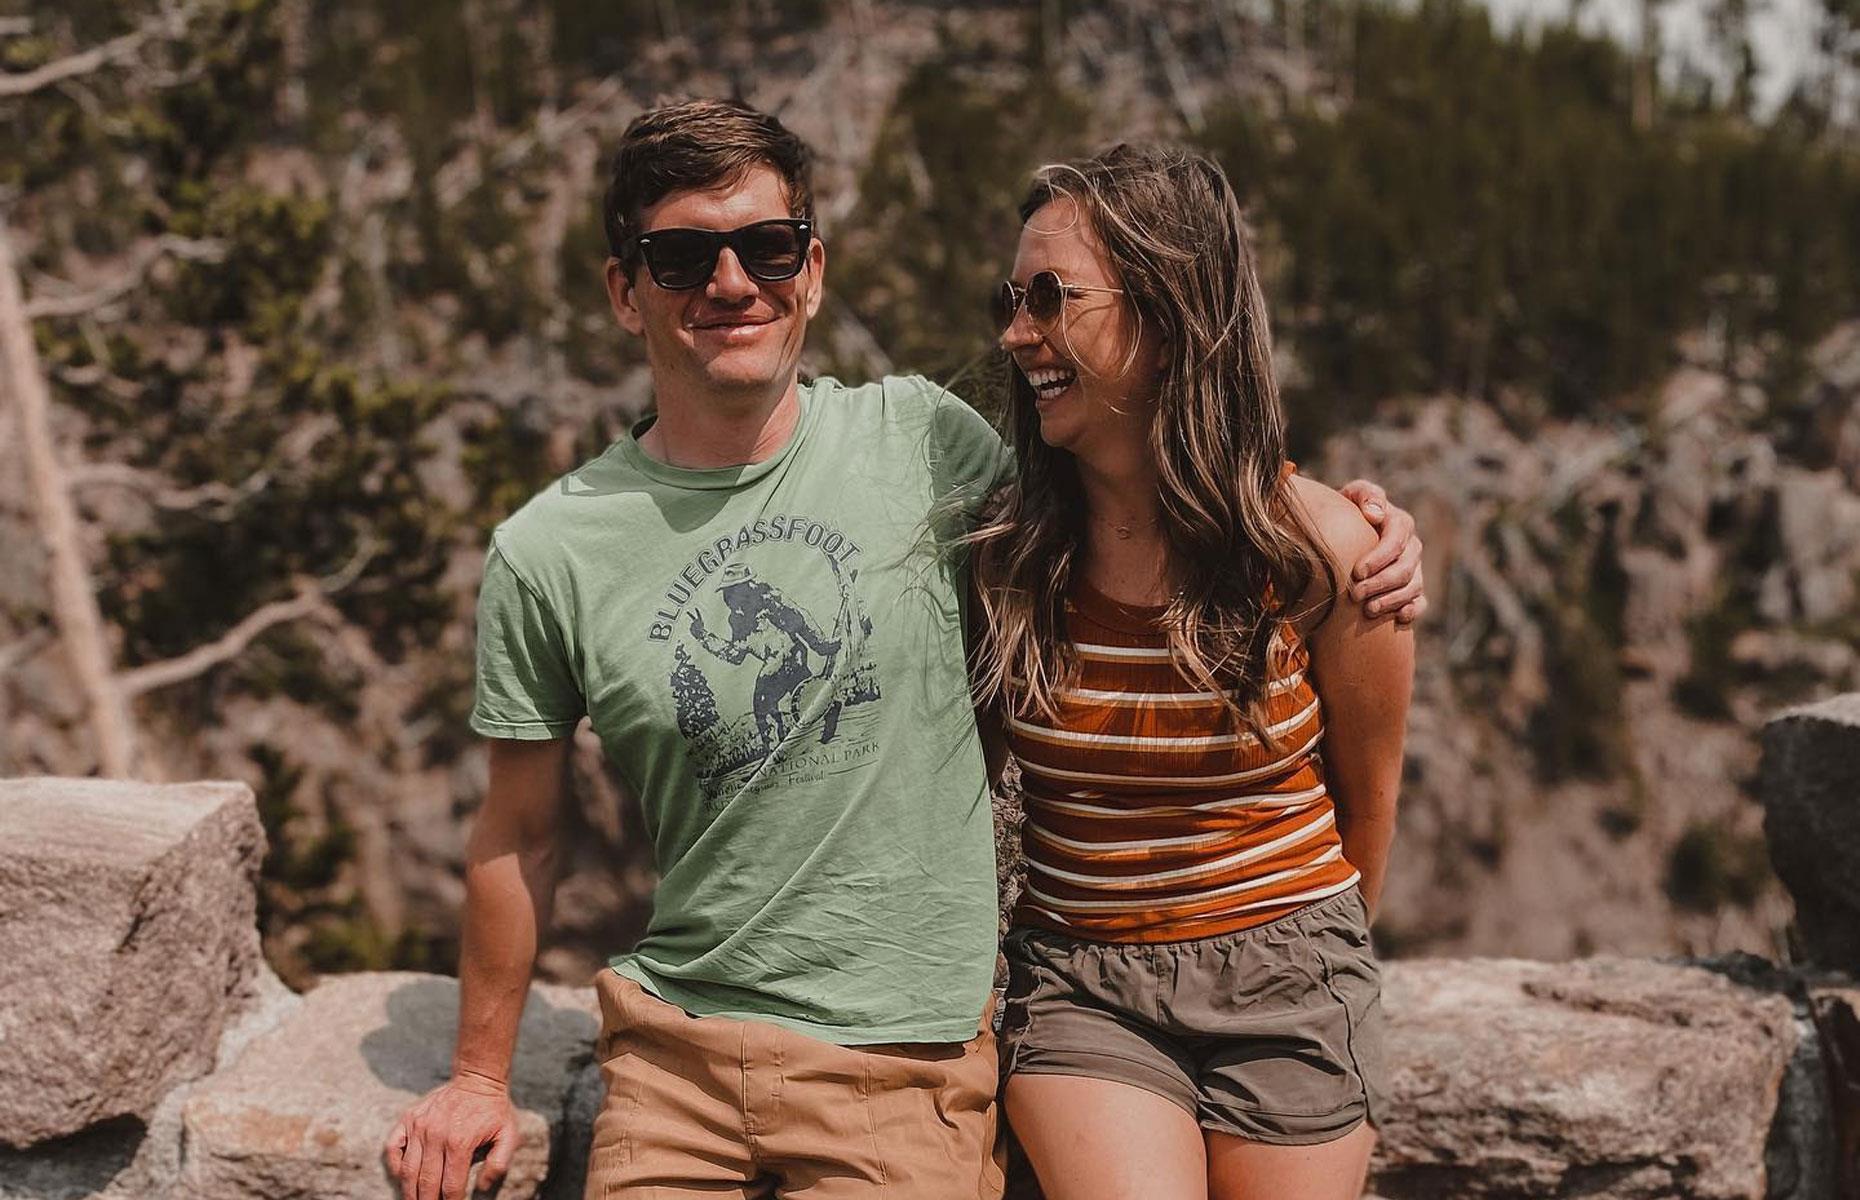 <p>Charlie and Julia met while both living in Colorado in 2017. They bought their first "travel trailer" and started renovating in 2018. The original plan was to save up, quit their jobs then travel full-time for a year. A silver lining to their pandemic experience allowed them to keep their jobs and work remotely, so they got a bigger 2018 Coachmen Chaparral 336TSIK that included work spaces. </p>